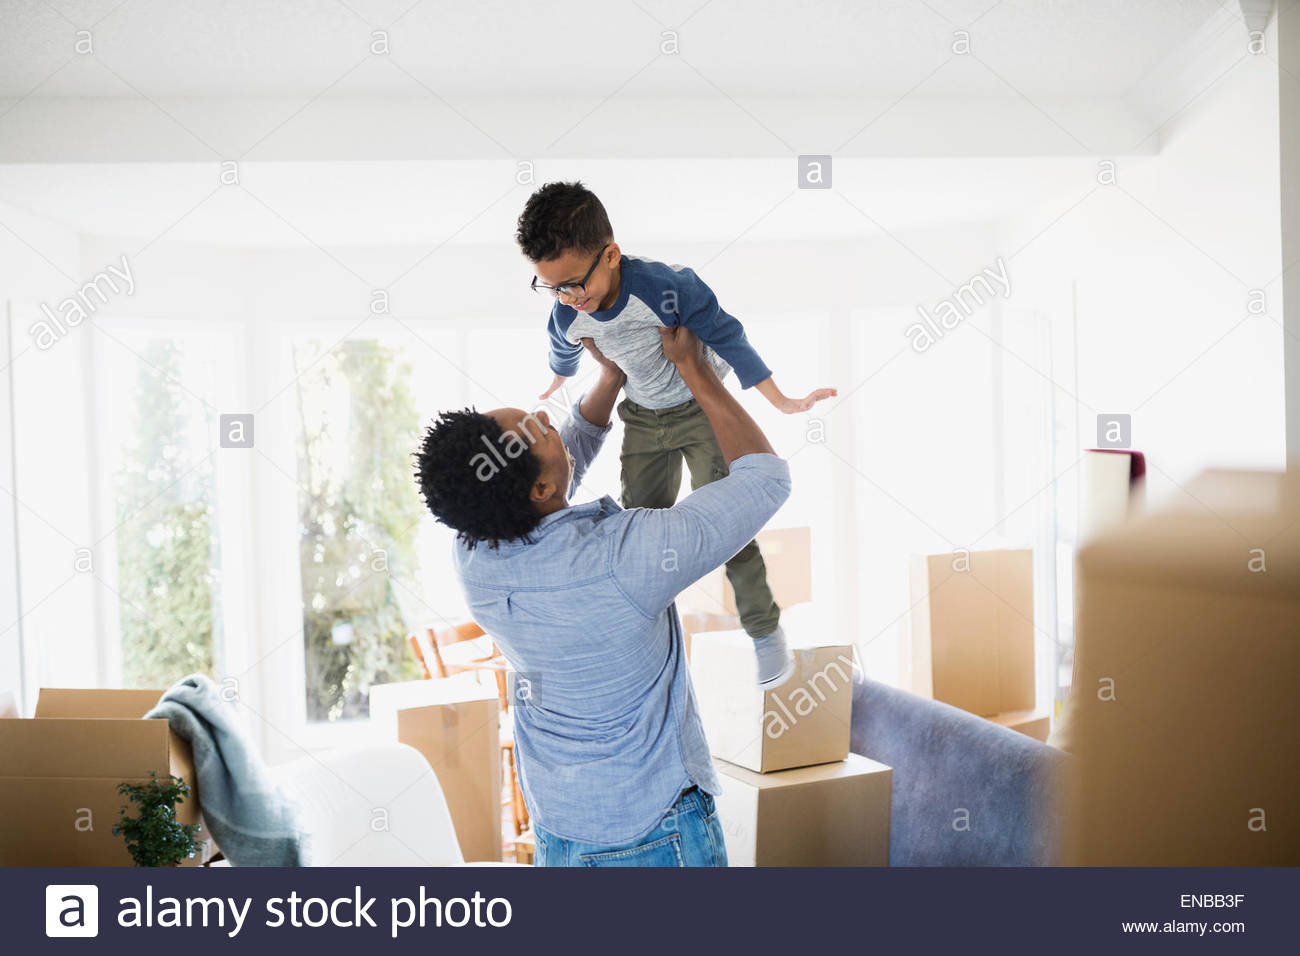 Moving boxes surrounding father lifting son Stock Photo